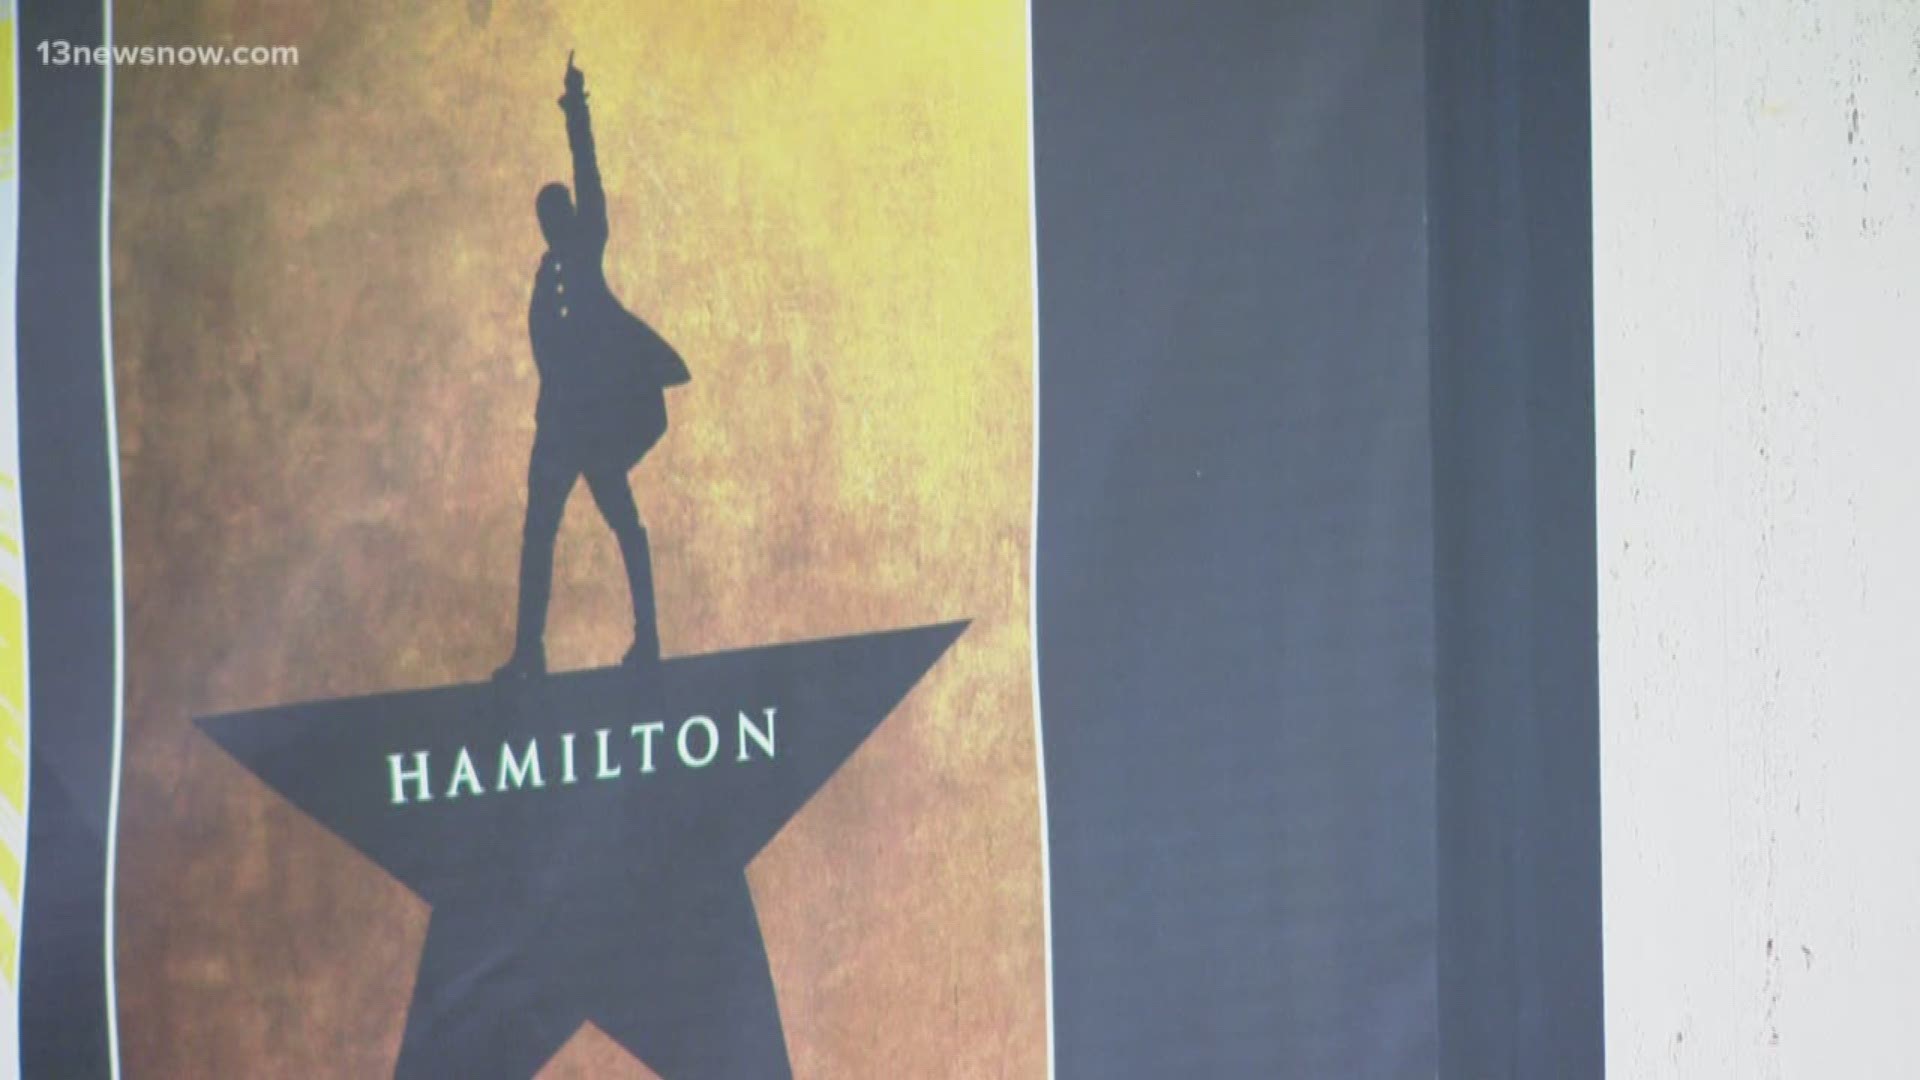 People were lined up for Hamilton Tickets in Norfolk. The Tony Award-Winning Musical is coming to the Chrysler Hall in Norfolk this December.